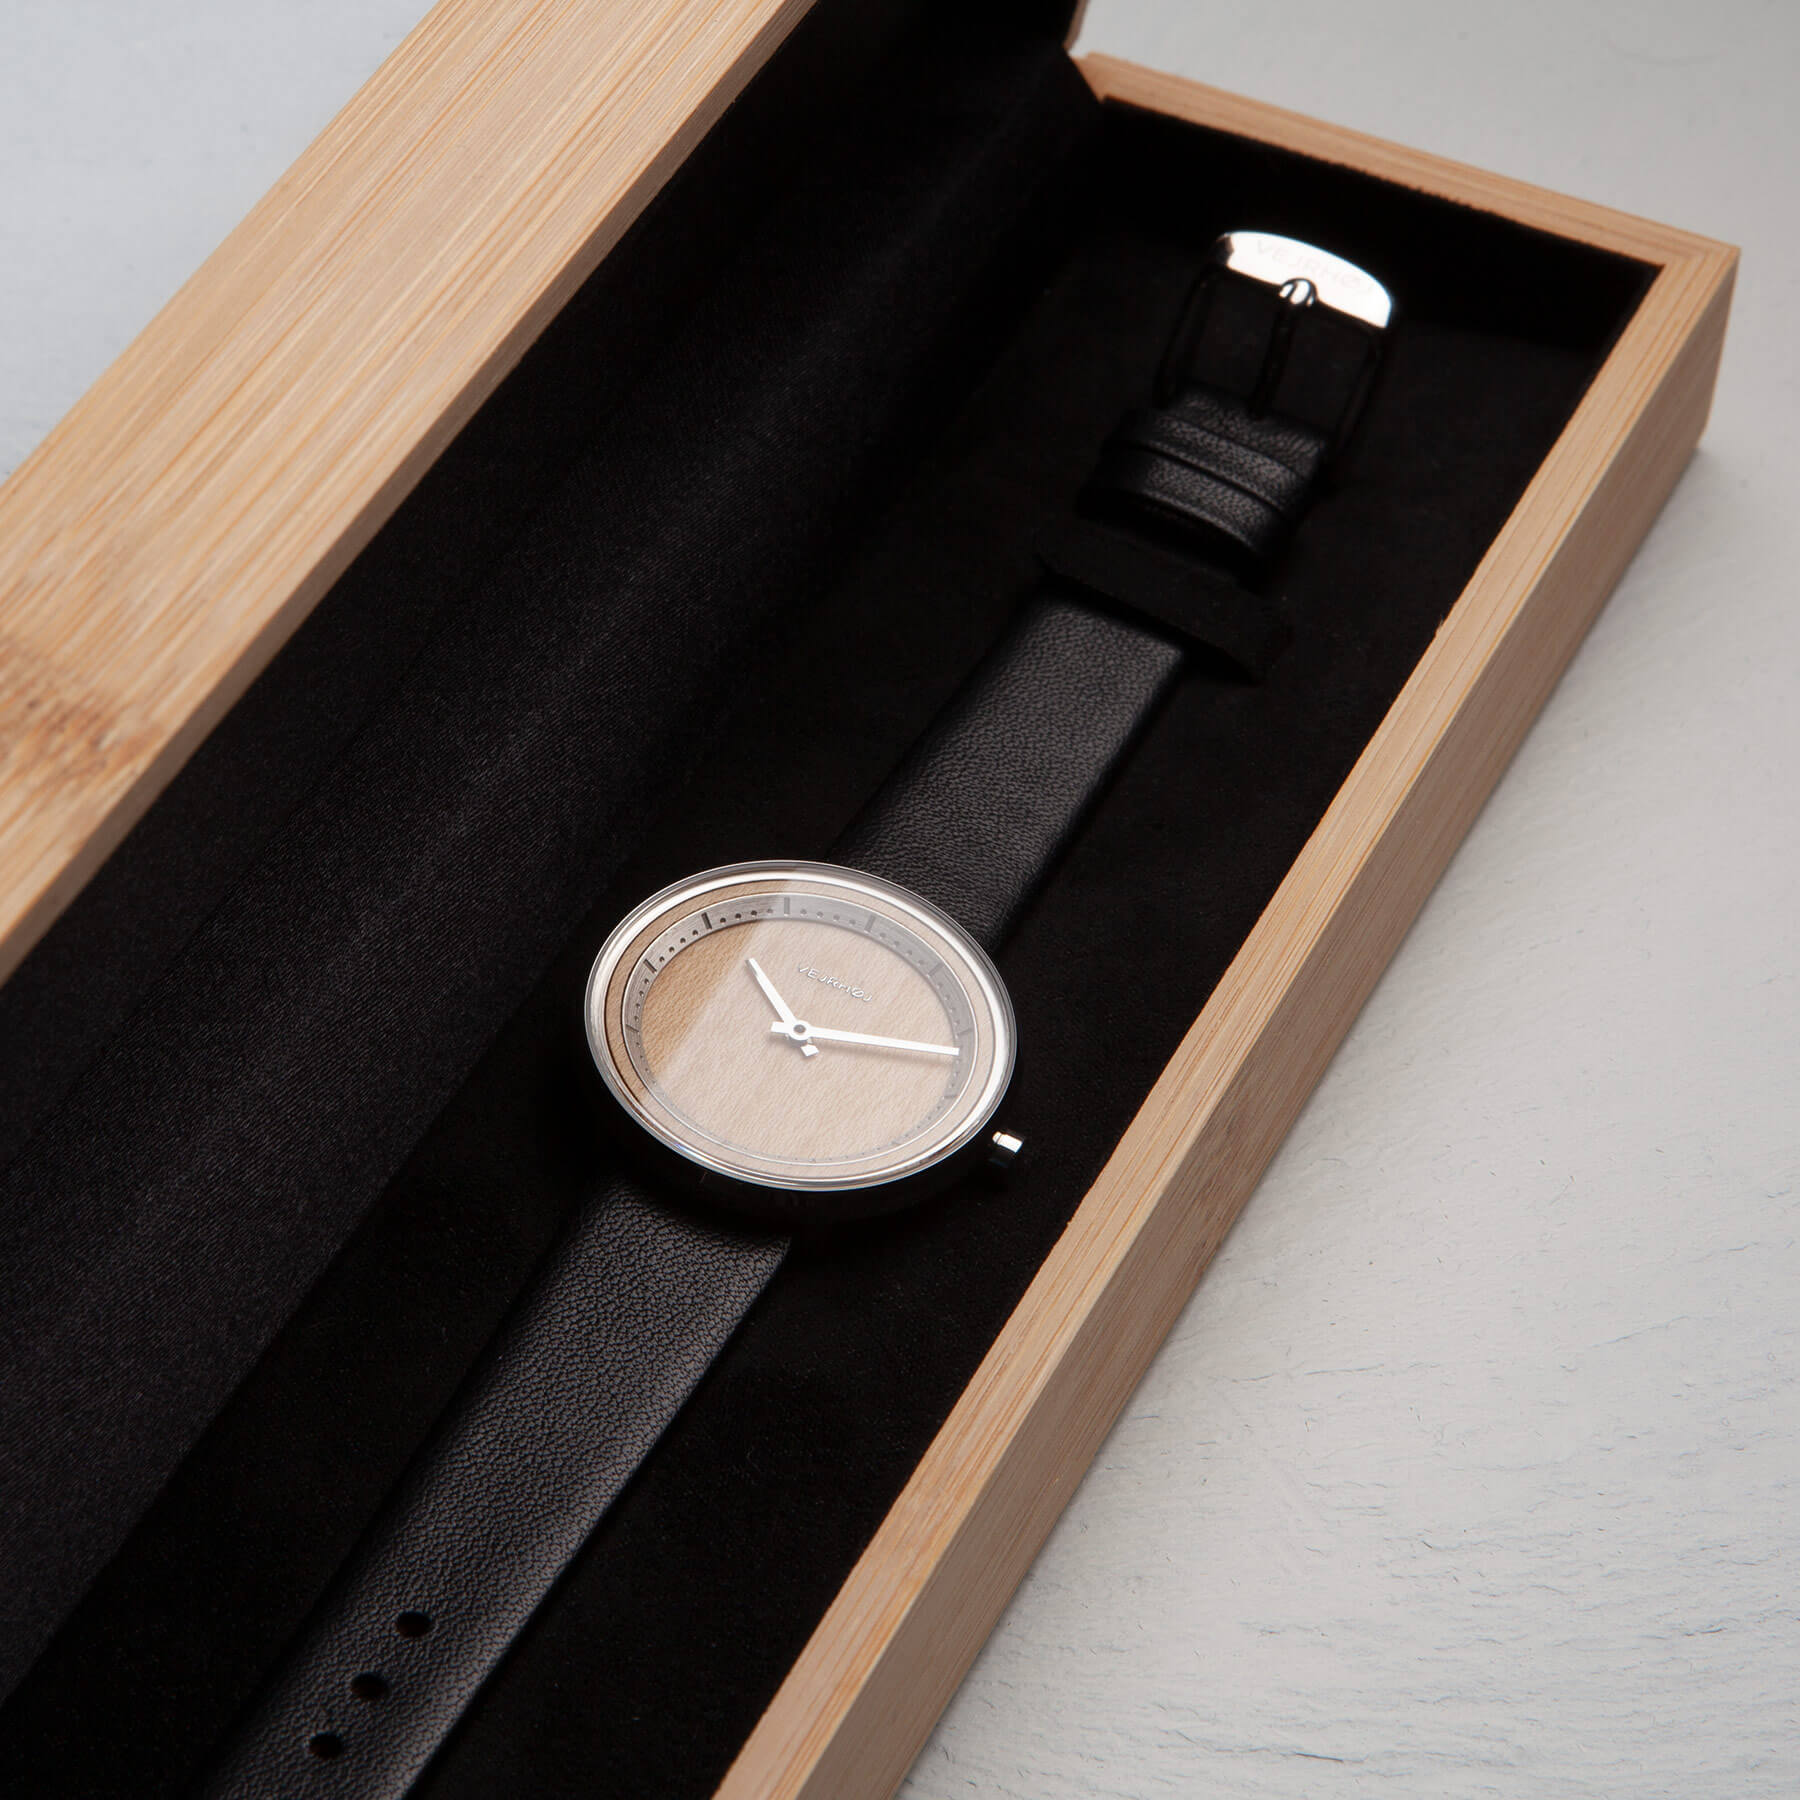 wooden watch for women placed in wooden box